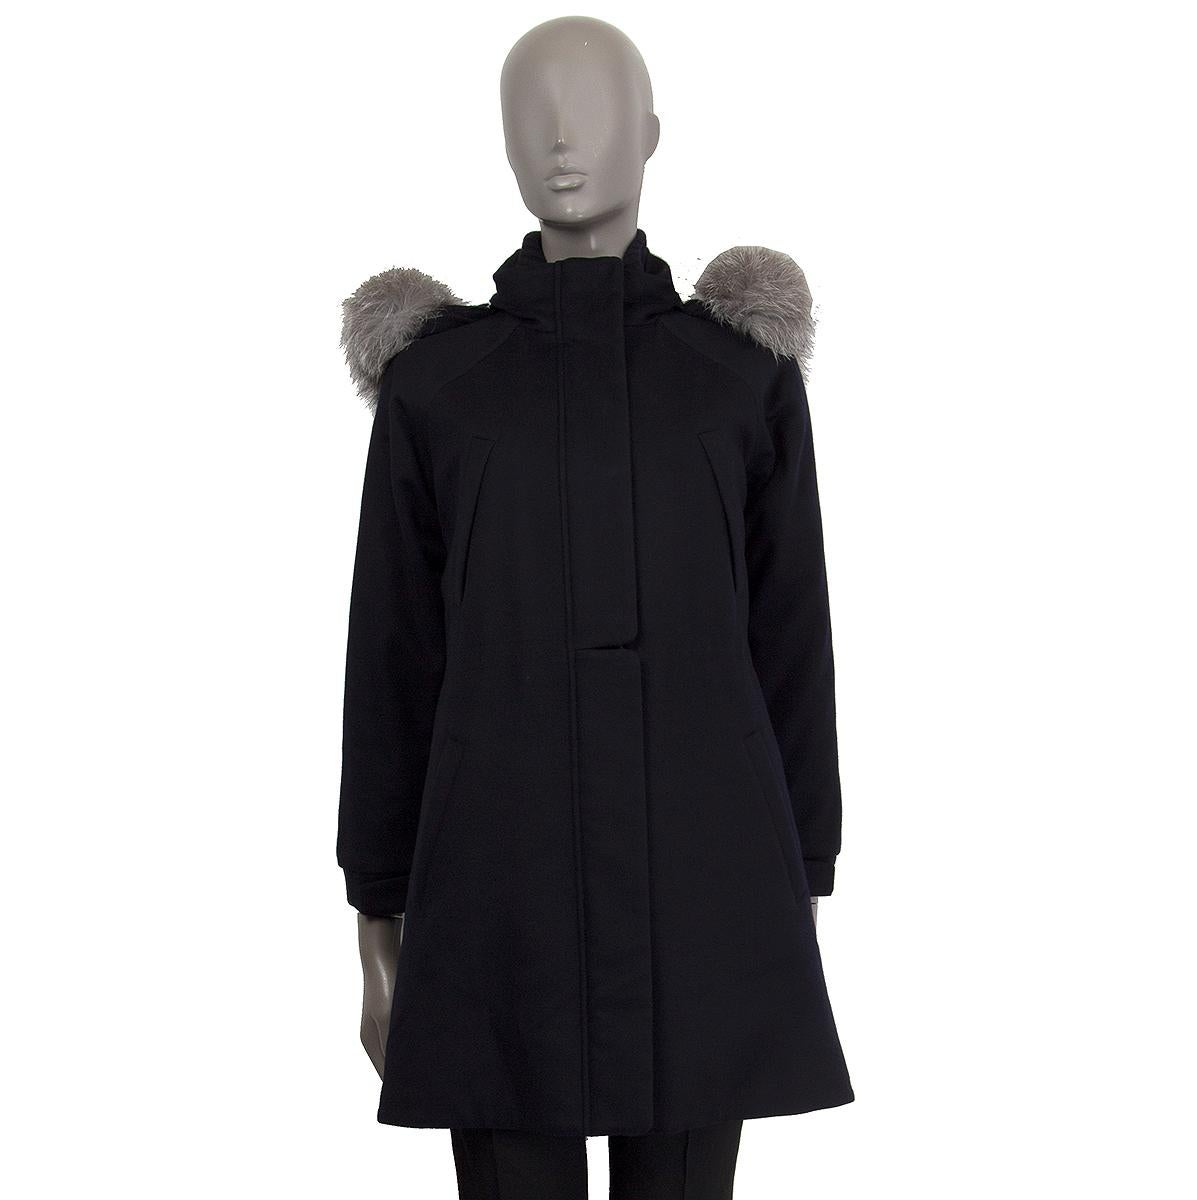 Loro Piana iconic 'Icery Long' coat in midnight blue cashmere (100%) with removable hood with dyed blue fox fur trim. Raglan sleeves have been measured fron neck. Two front zipper and open pockets. Opens with hidden zipper and buttons on the front.